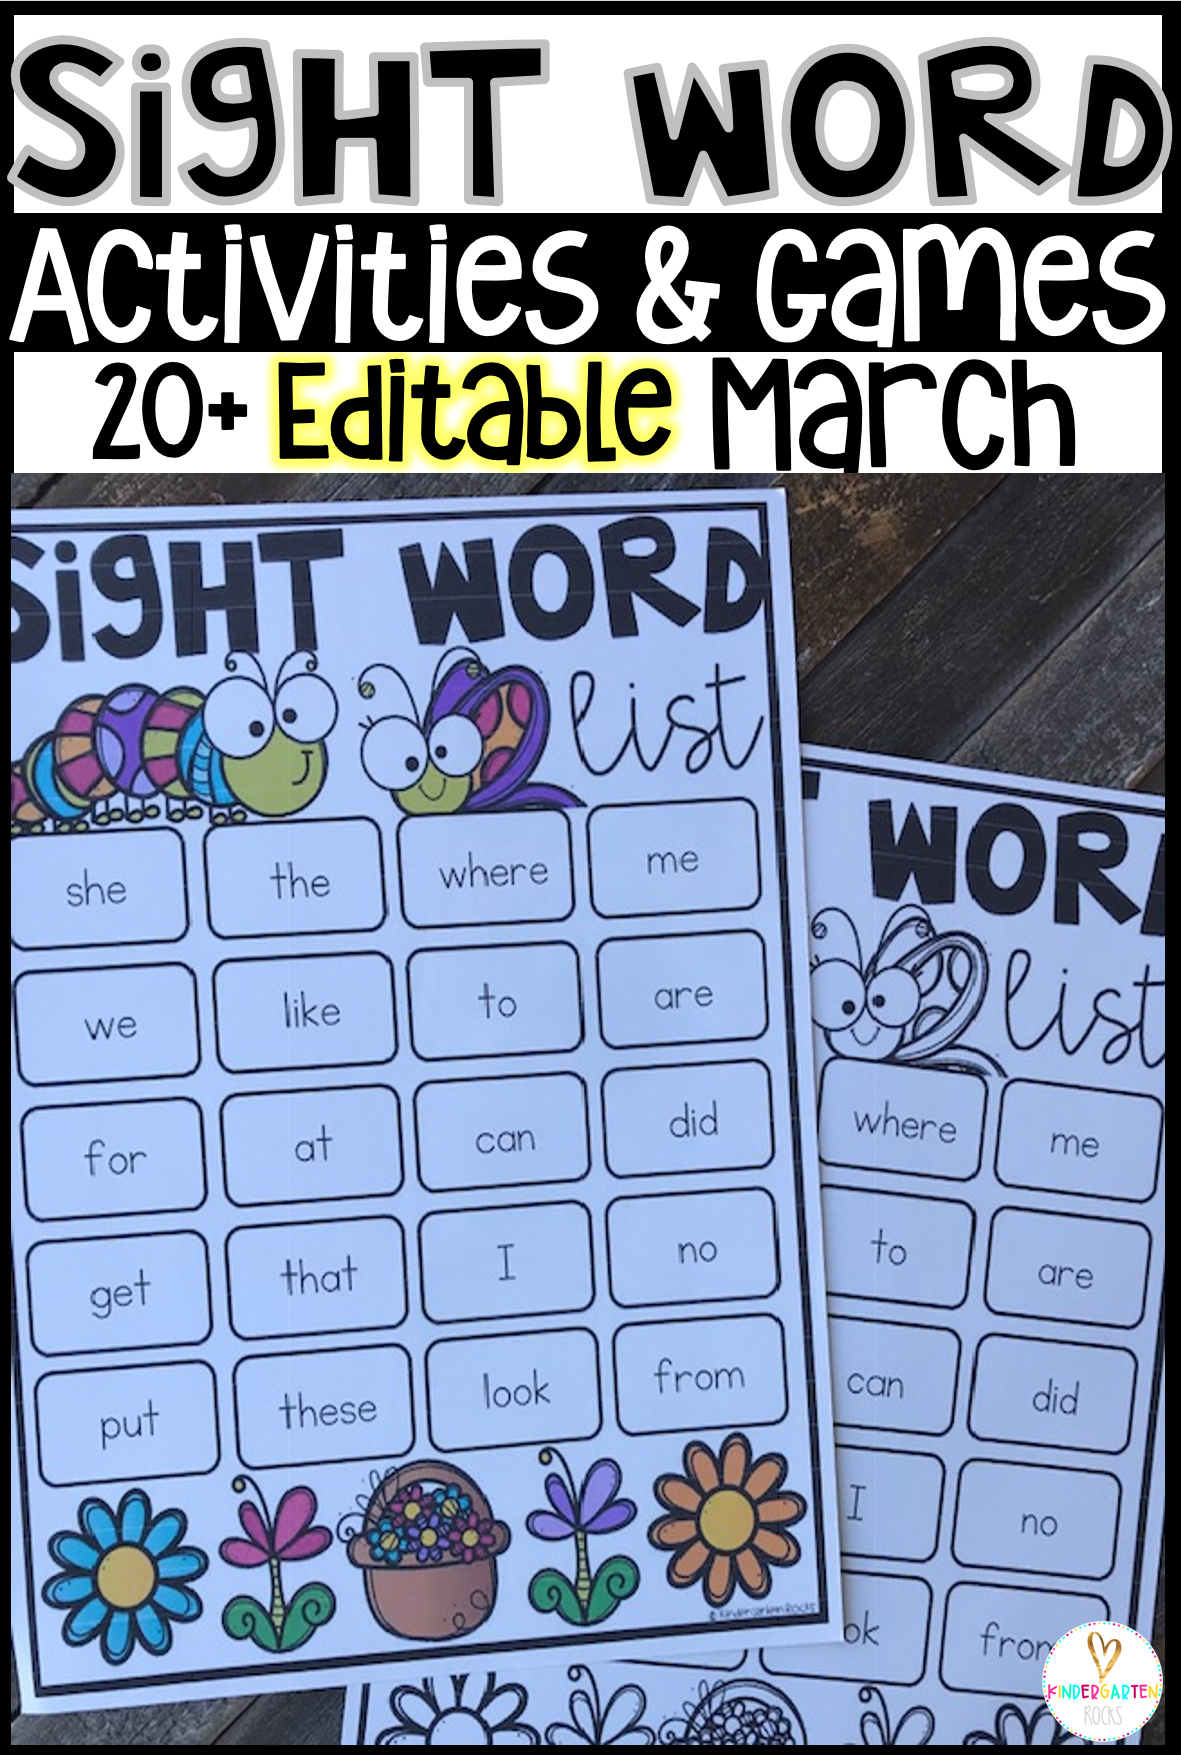 Are you looking for spring themed sight word activities that you can change to meet the needs of your kindergarten and/or first grade children?   Then, you will love Editable Sight Words Printables, Activities and Games for March.